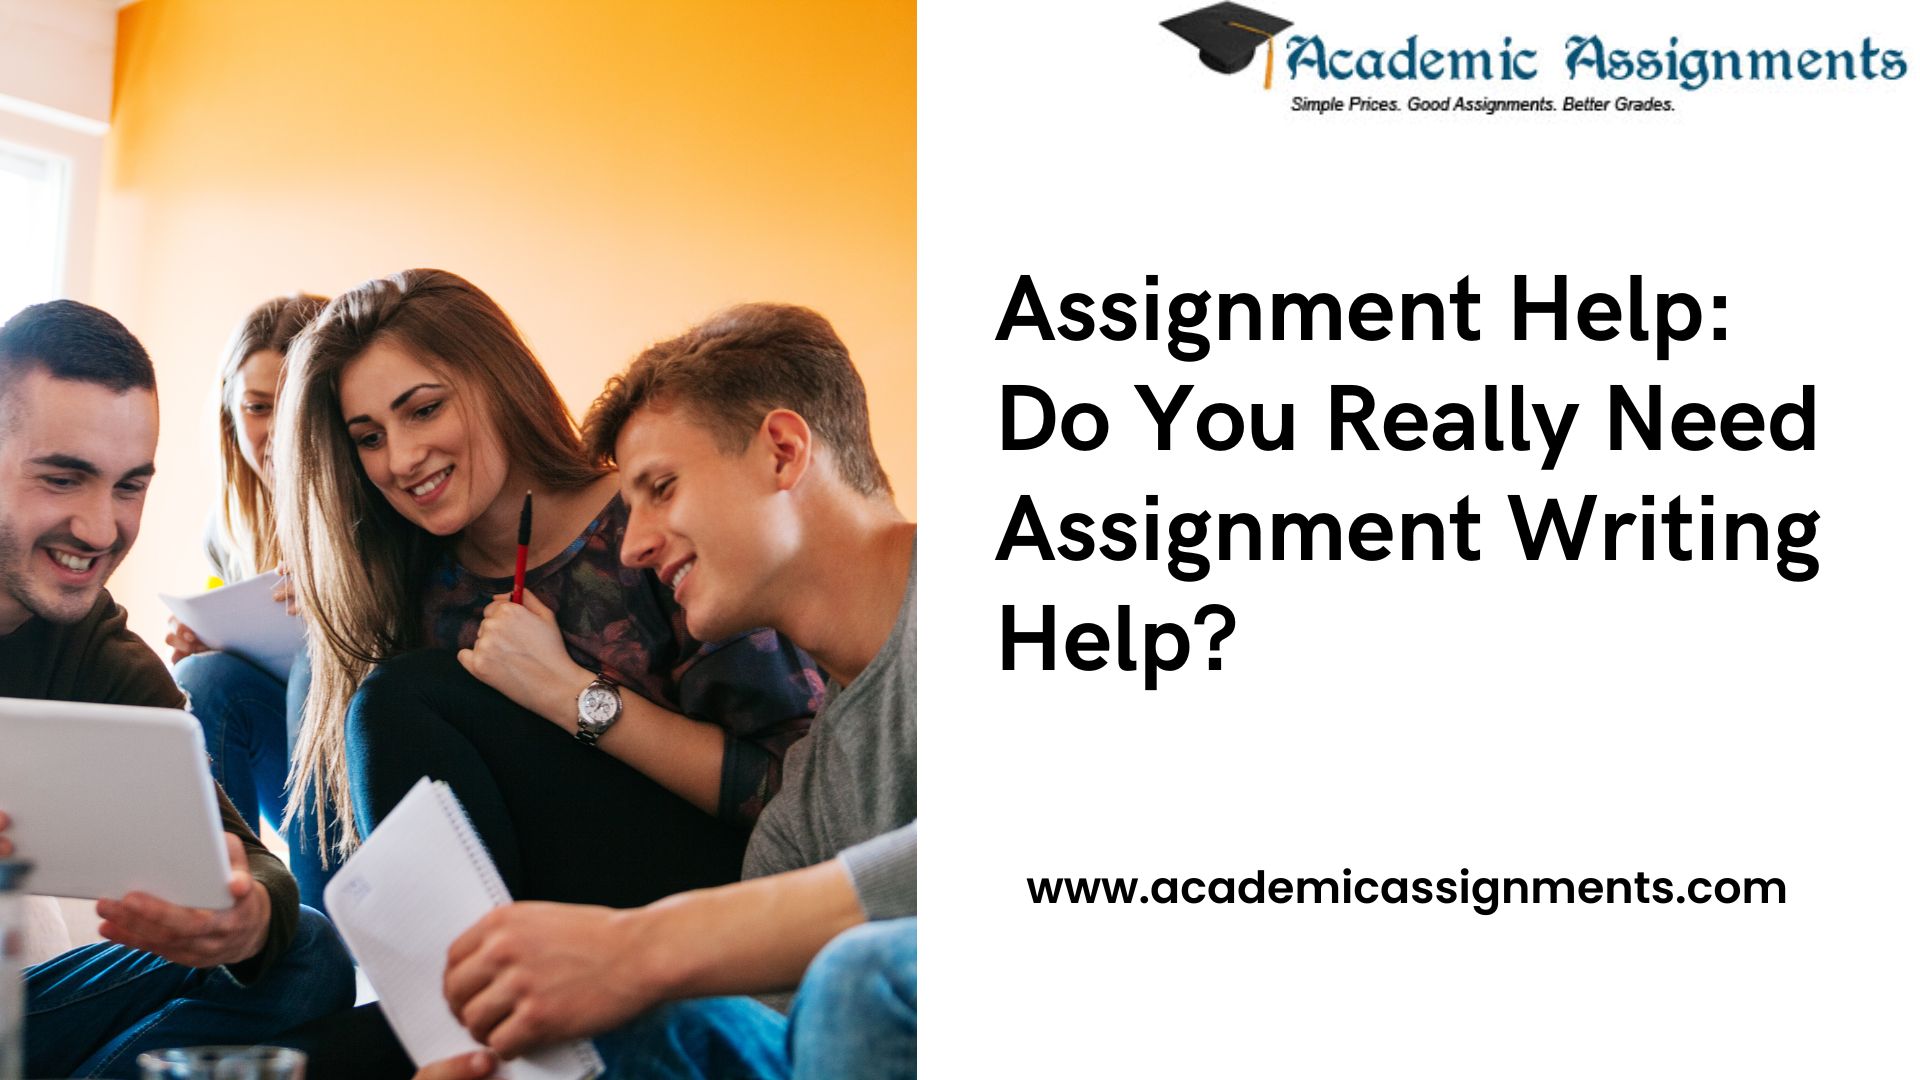 Do You Really Need Assignment Writing Help